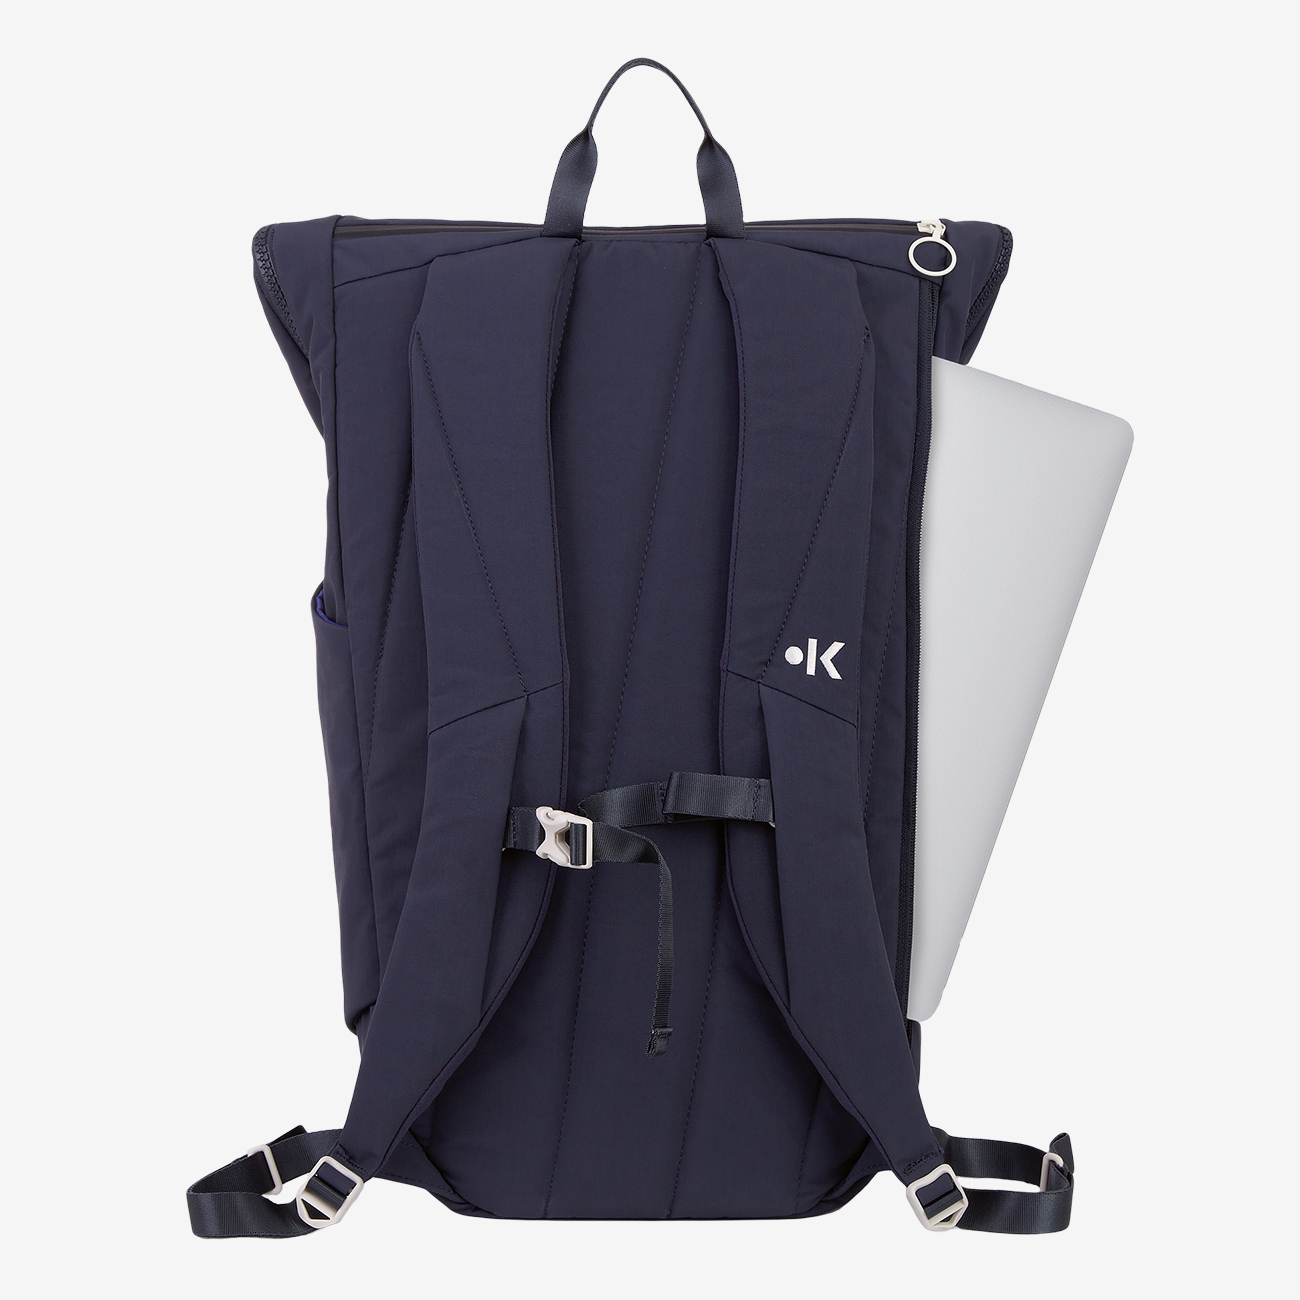 Backpack Inki - Blueish Black, Bags for your yoga mat, Yoga Mat Bags, Yoga, EQUIPMENT & ACCESSORIES